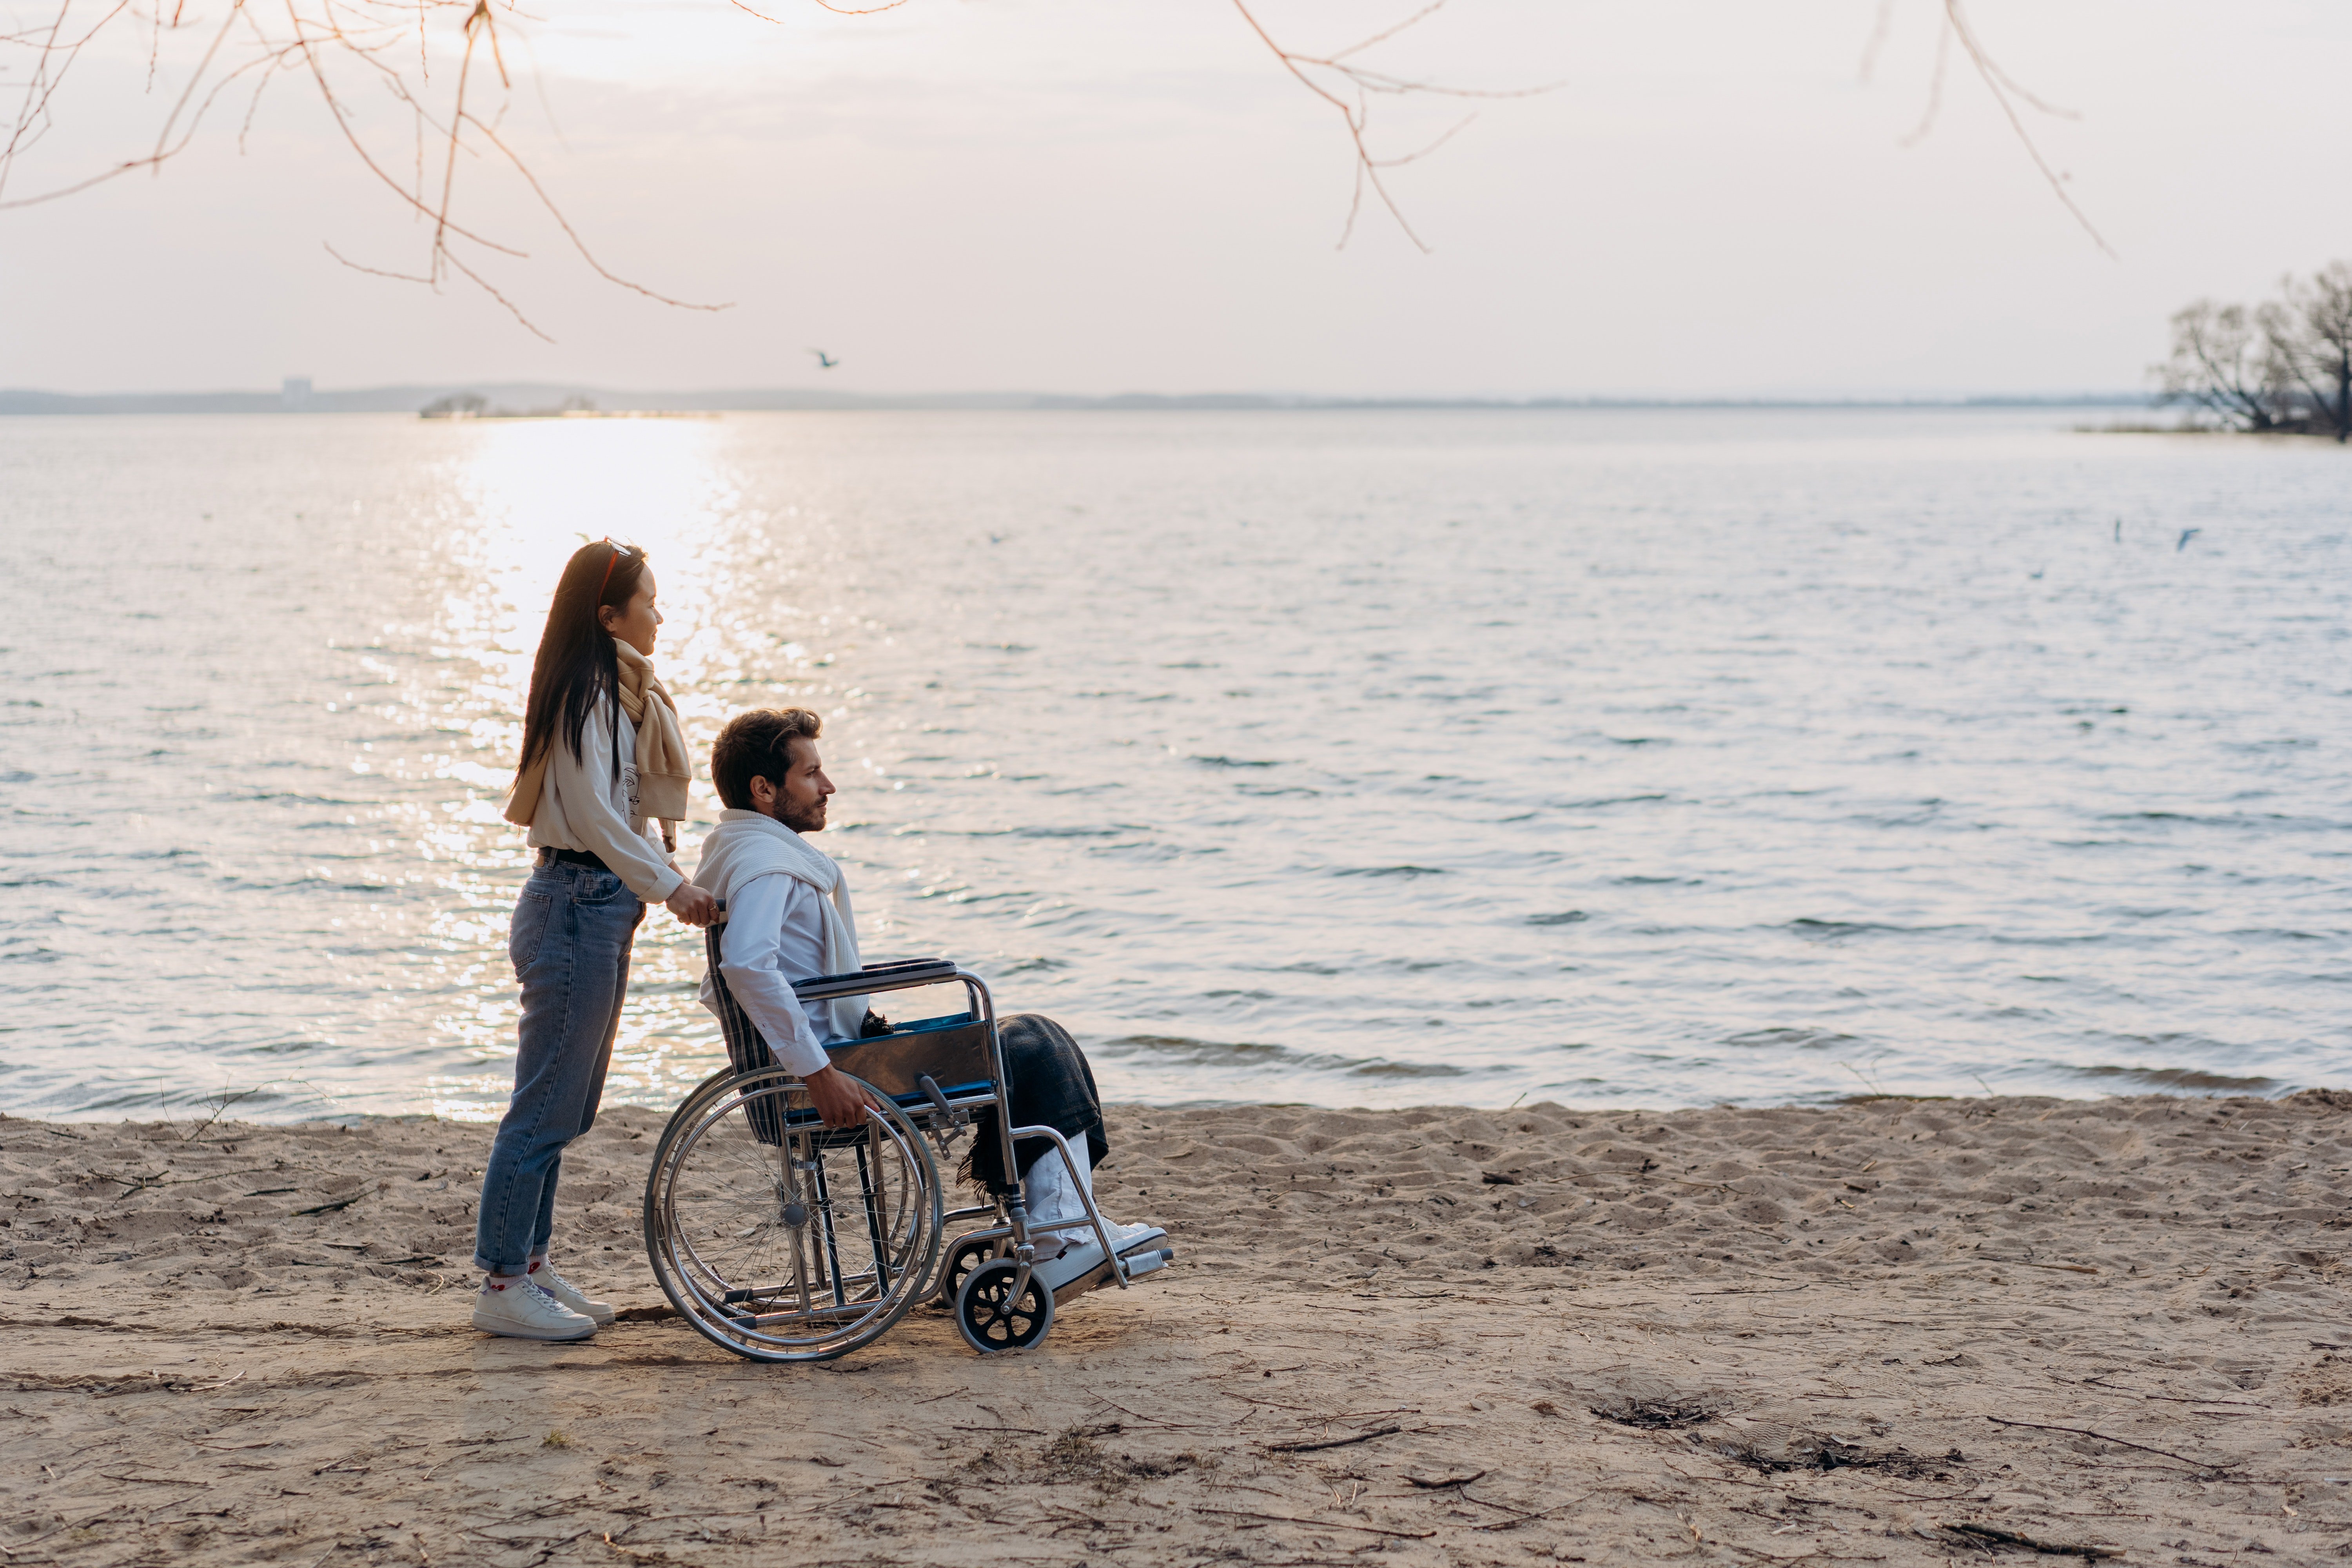 OP's happiness was replaced with treatments, surgeries, and a wheelchair due to a degenerative disease. | Source: Pexels